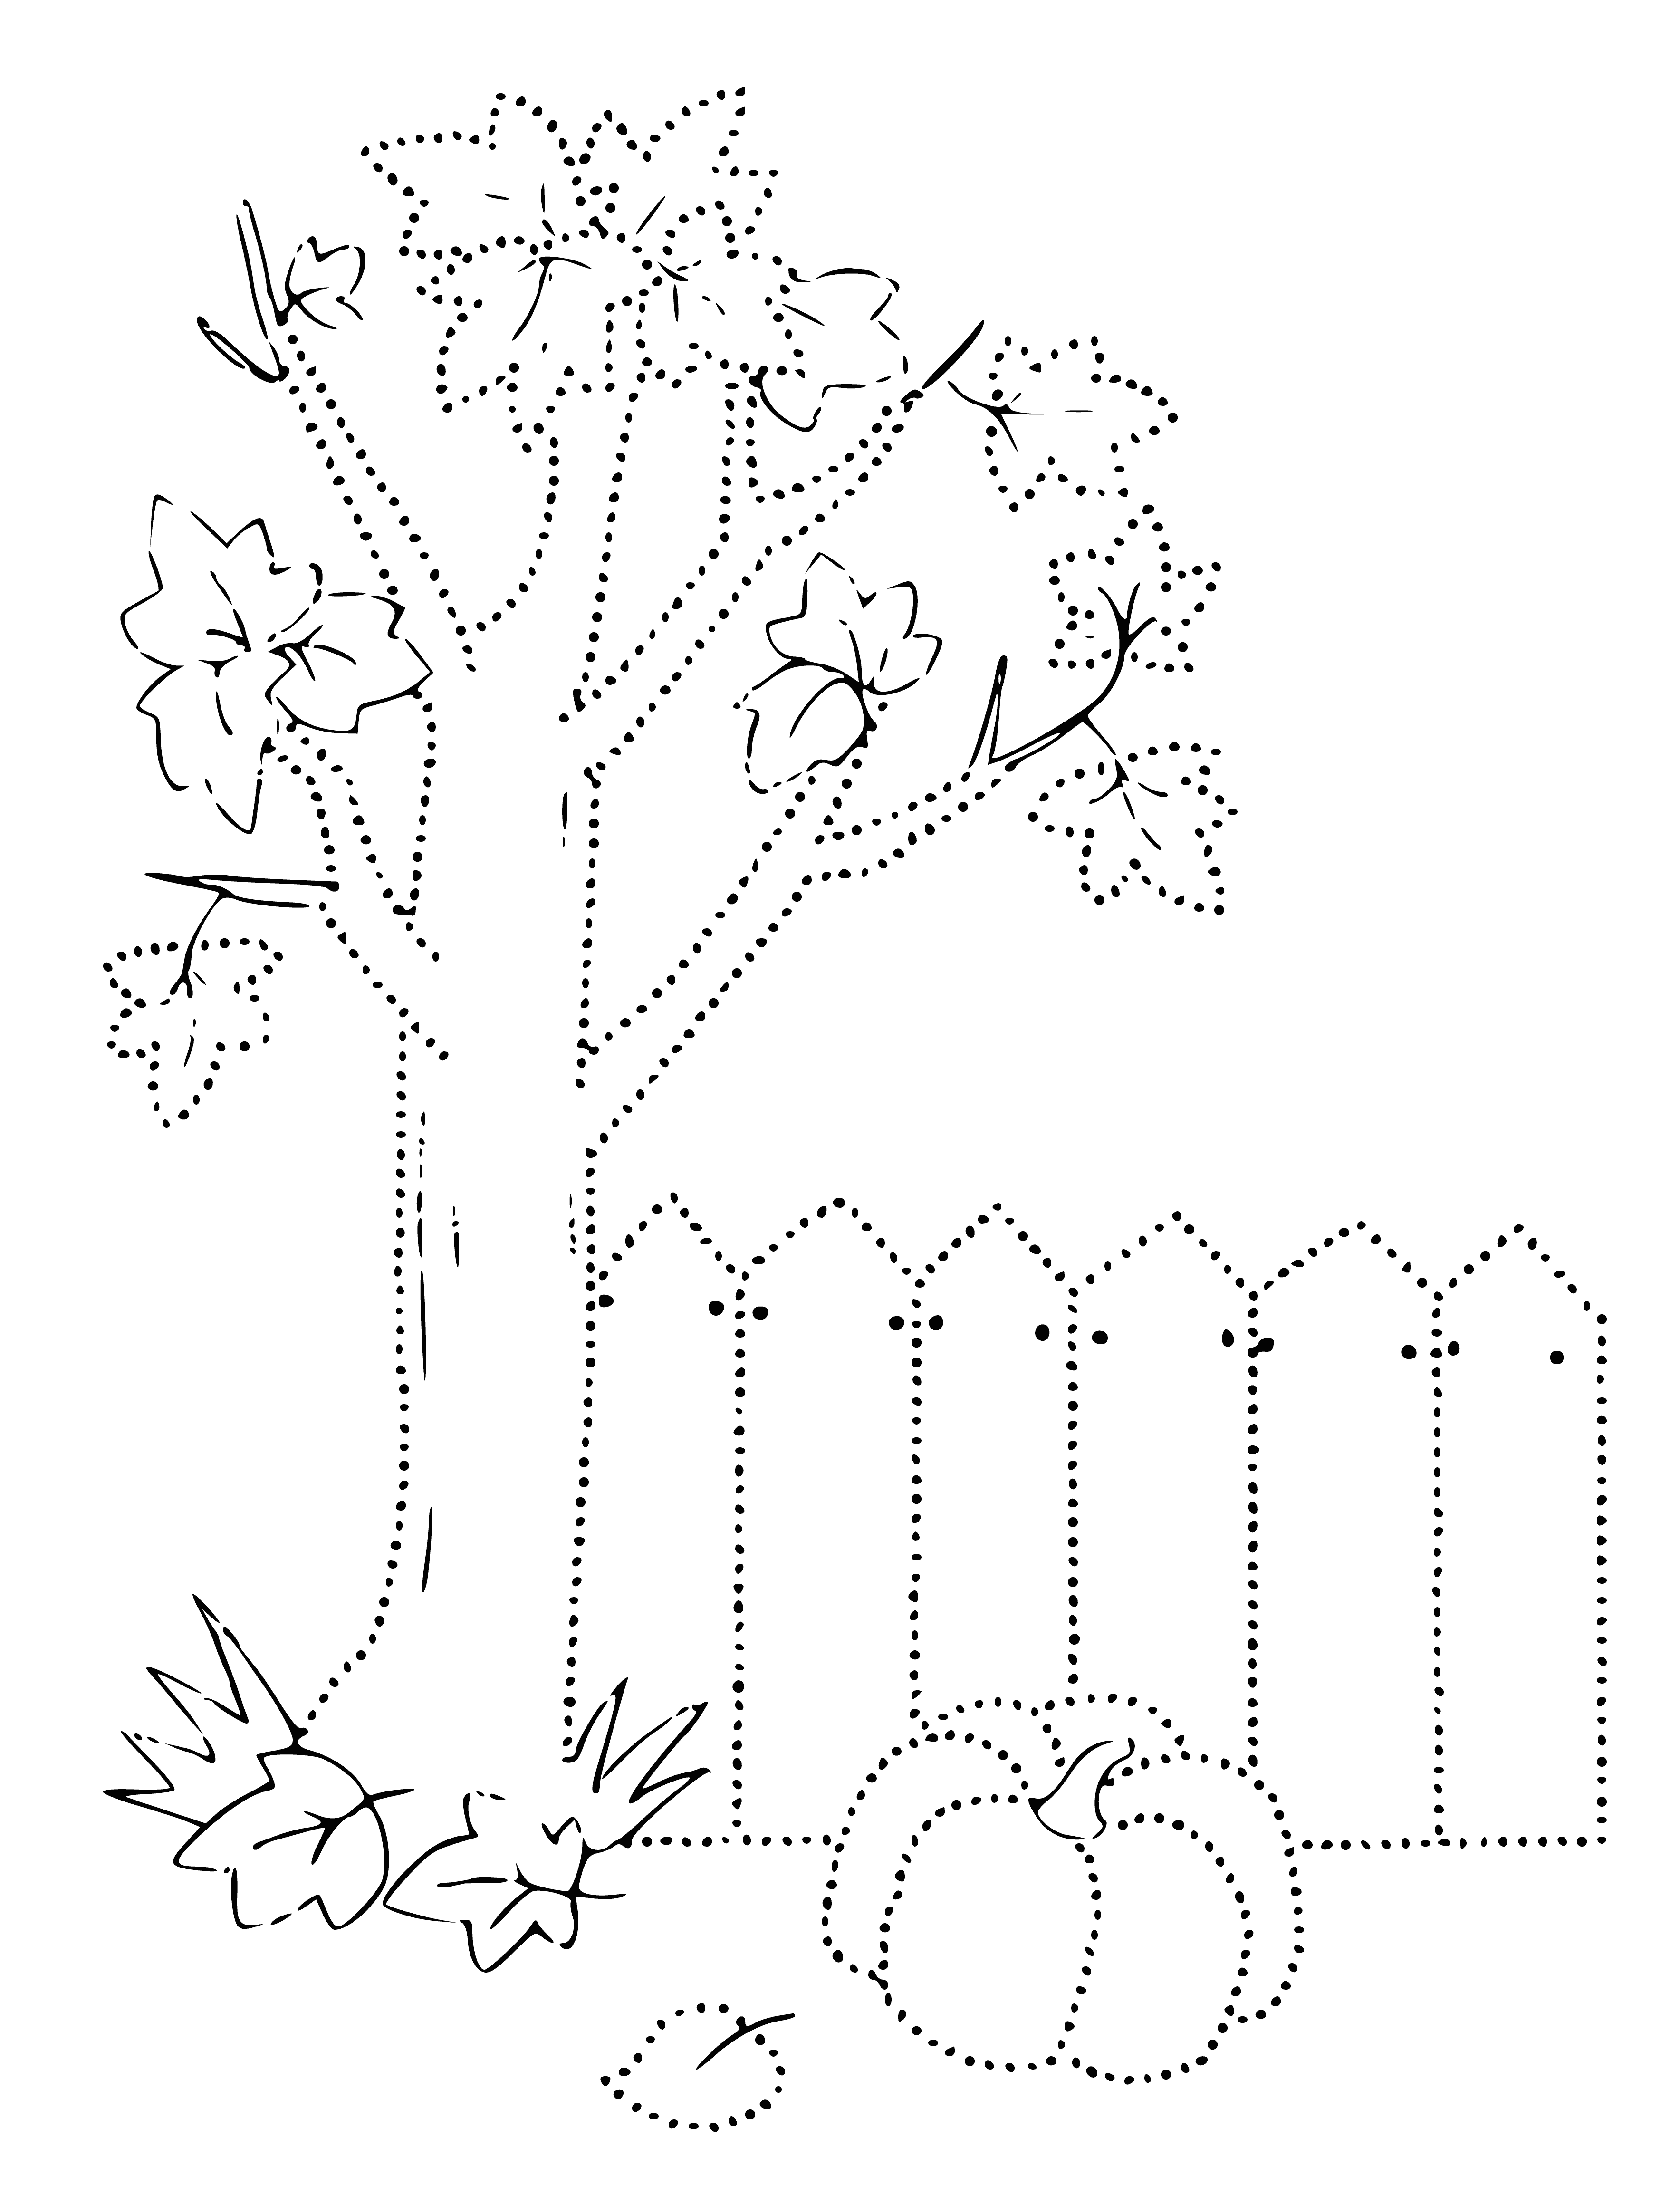 coloring page: Leaves falling, trees getting ready for winter. Leaves red, yellow & orange. Blue sky, sunshine.